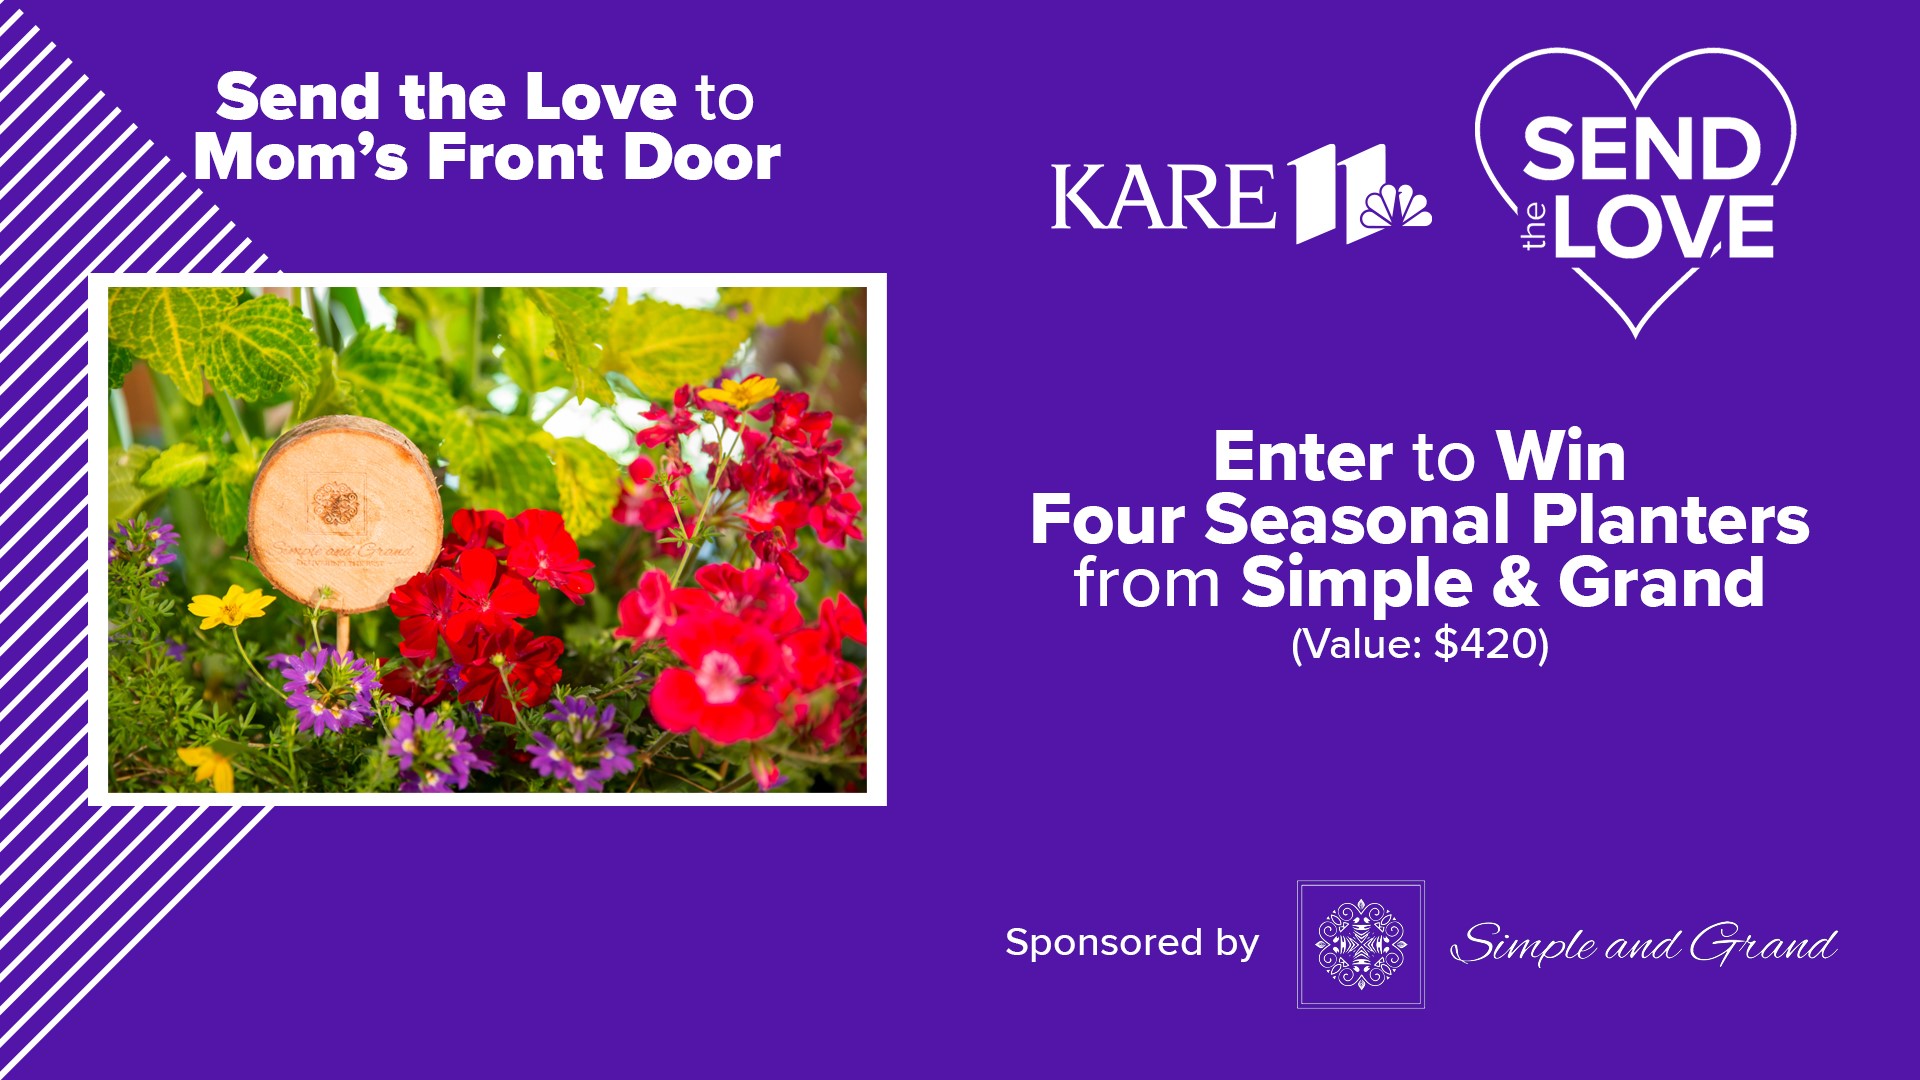 Enter to win four seasonal planters from Simple & Grand.